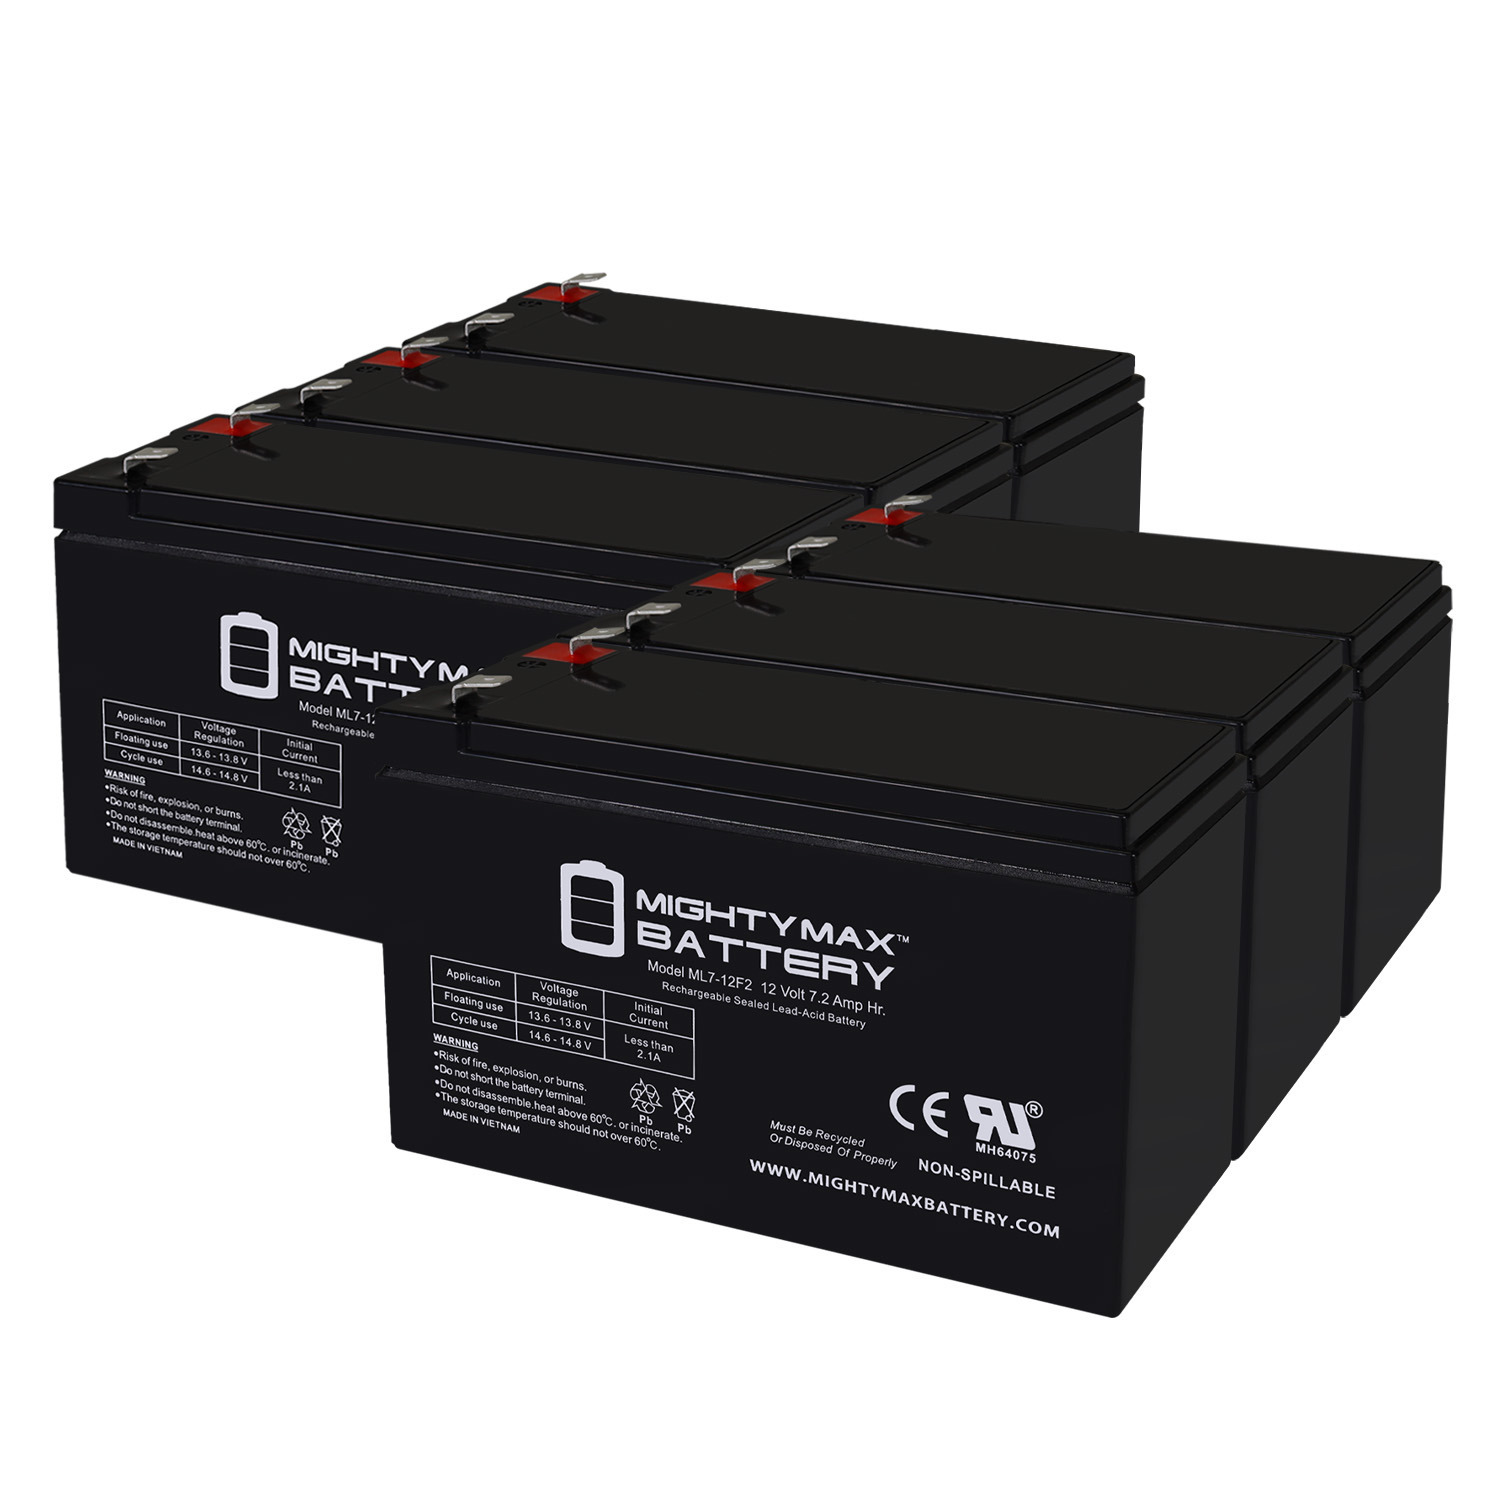 12V 7Ah F2 Battery Replaces Enersys Genesis 150 Scooter Moped GY6 - 6 Pack